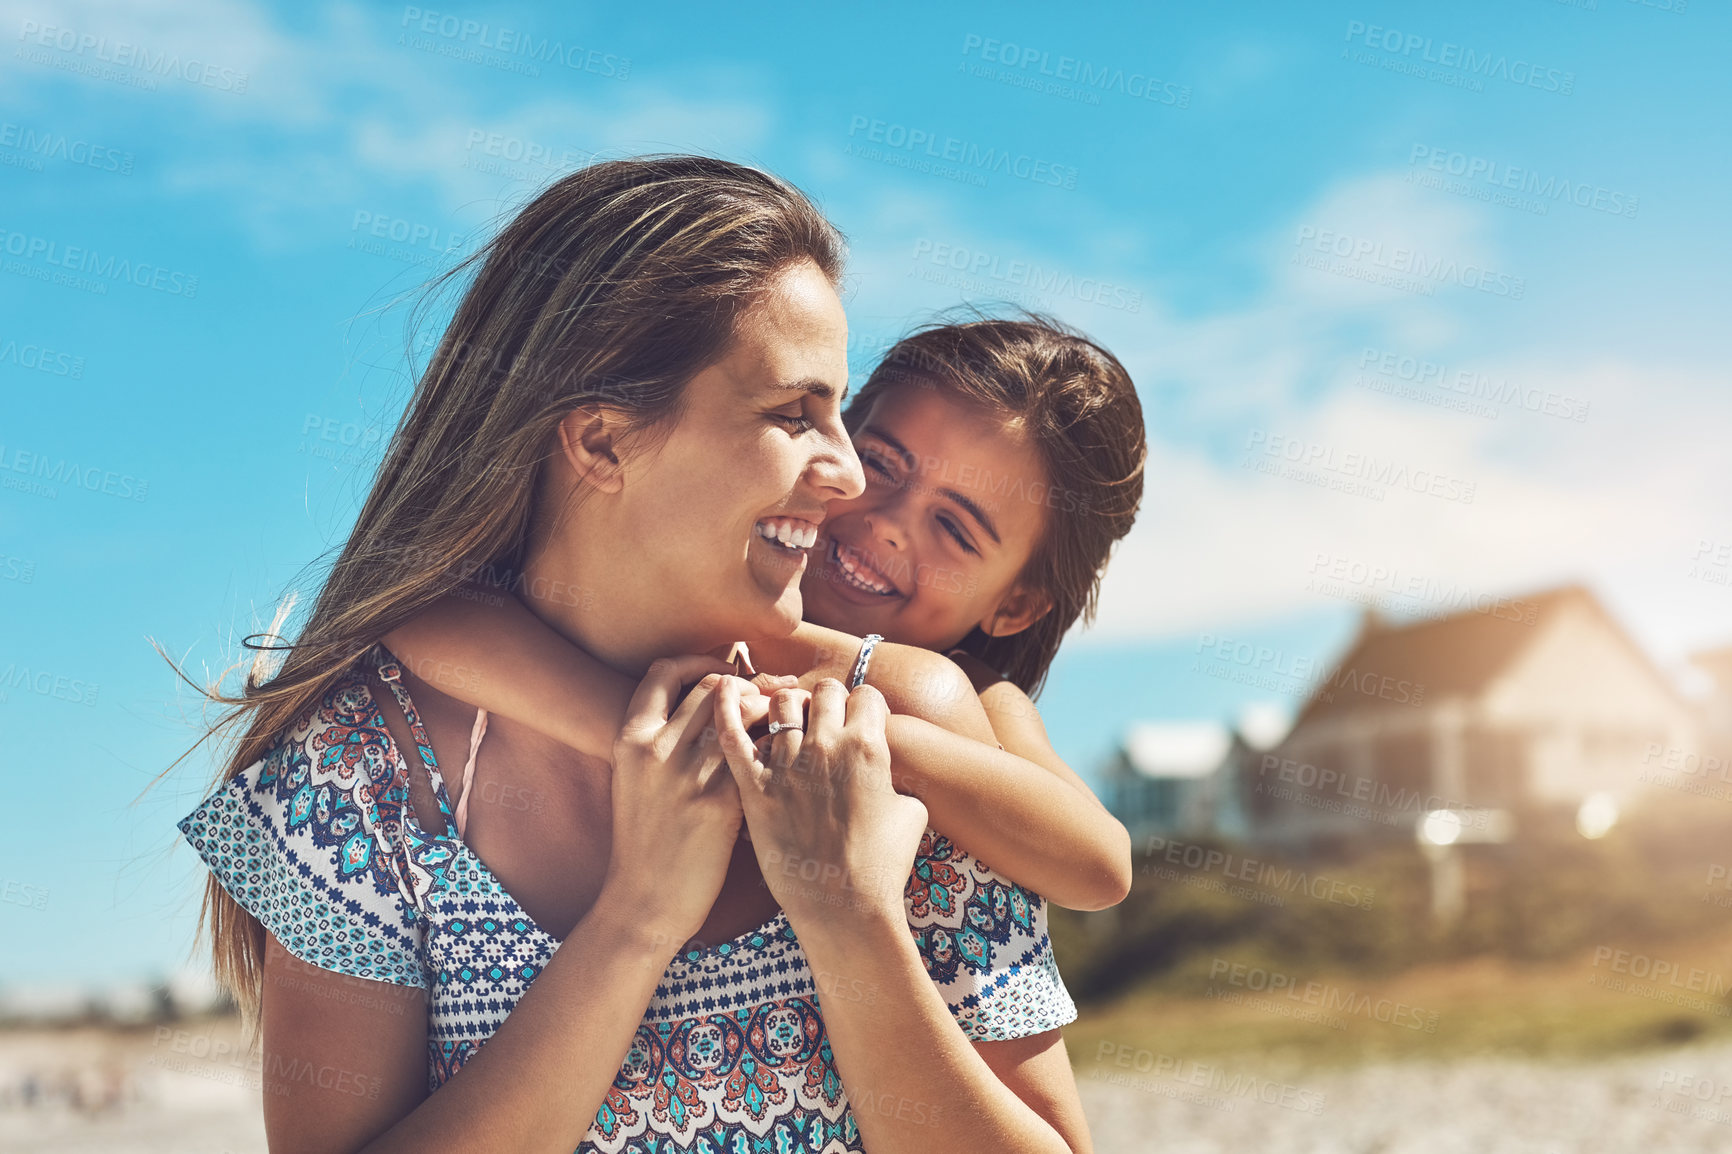 Buy stock photo Cropped shot of a young mother and her daughter enjoying a day at the beach